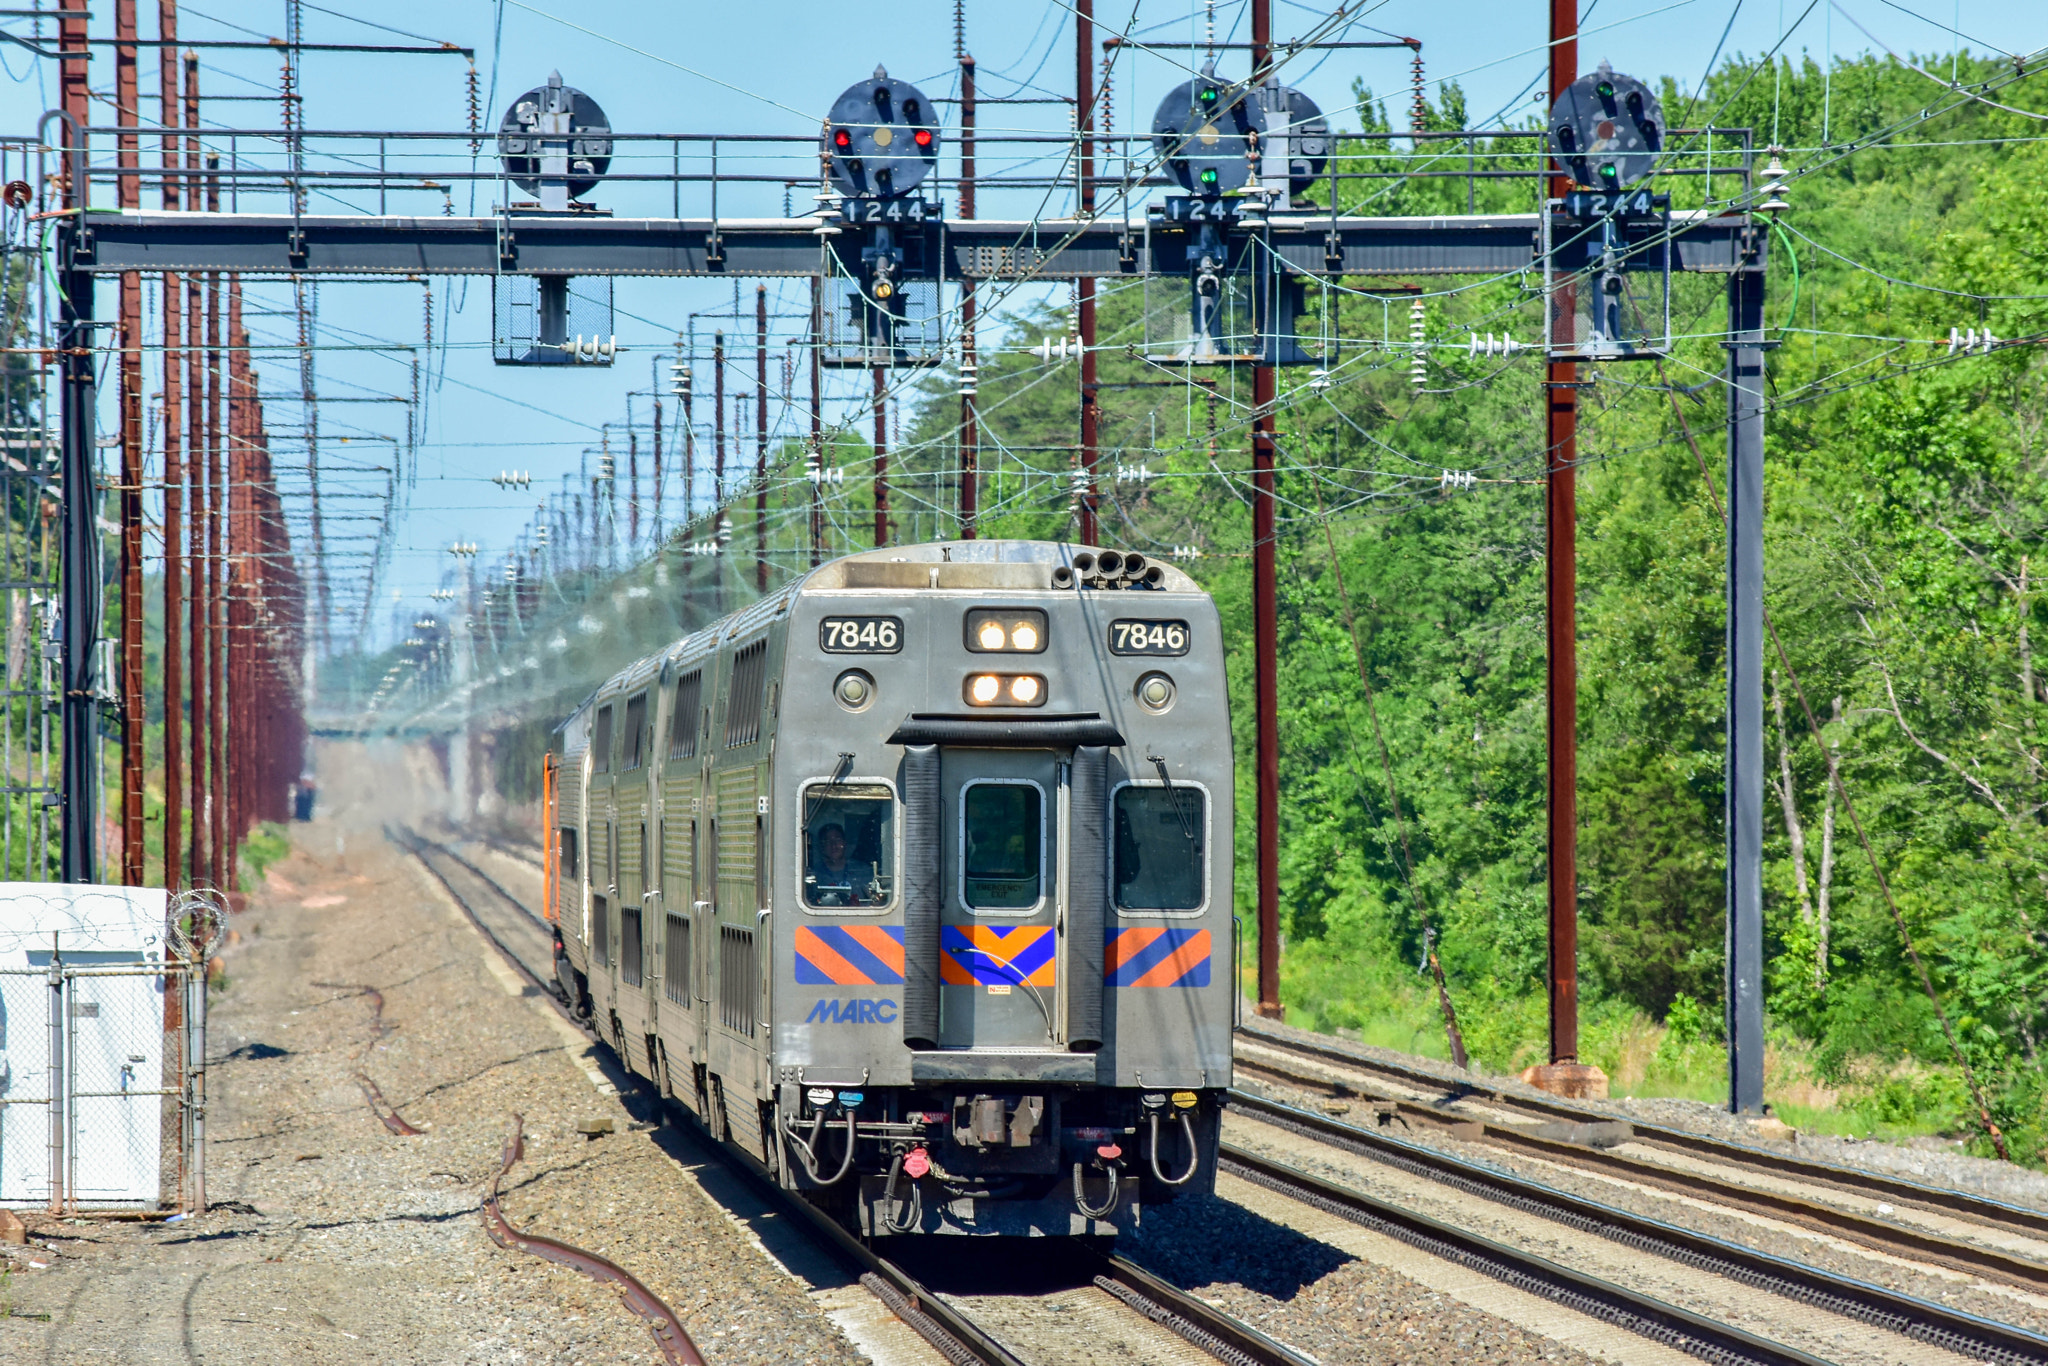 Nikon D7200 sample photo. Marc train passing through the seabrook signals photography